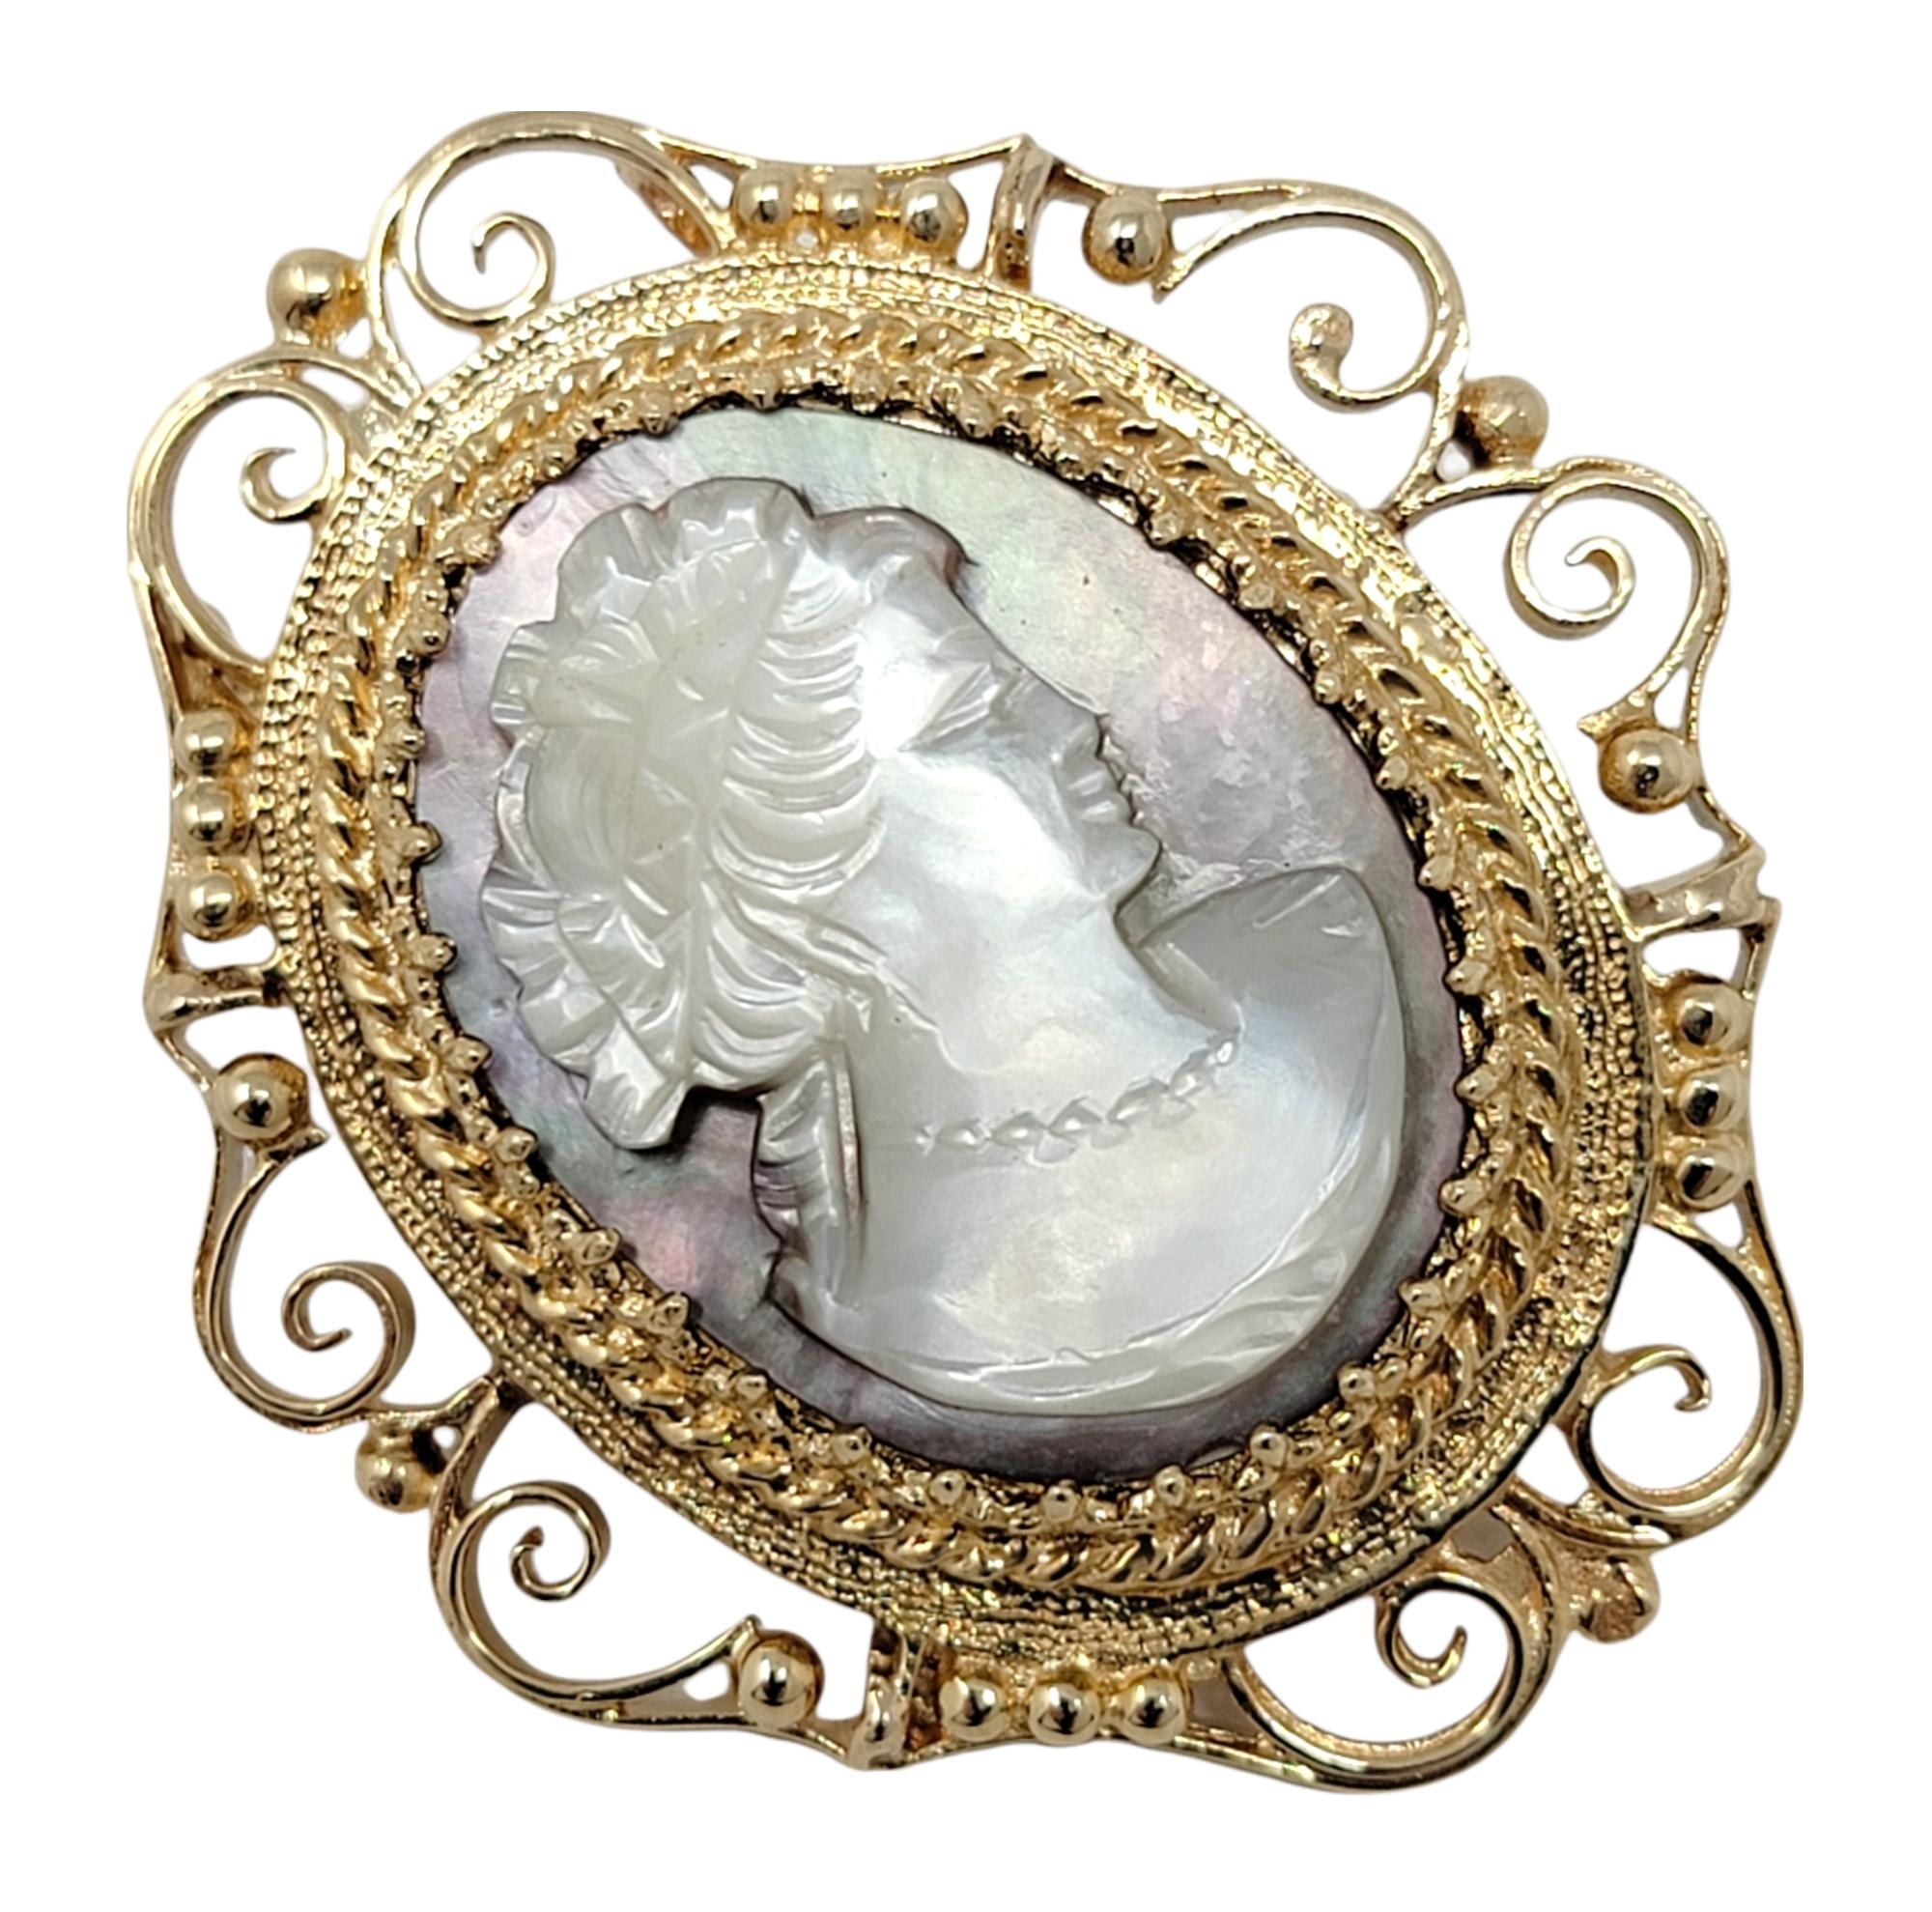 Step back in time with this incredible antique cameo brooch / pendant. This vintage feminine piece features an intricately carved semi-opaque iridescent Mother of Pearl surrounded by a textured golden frame. The oval image features the profile of a